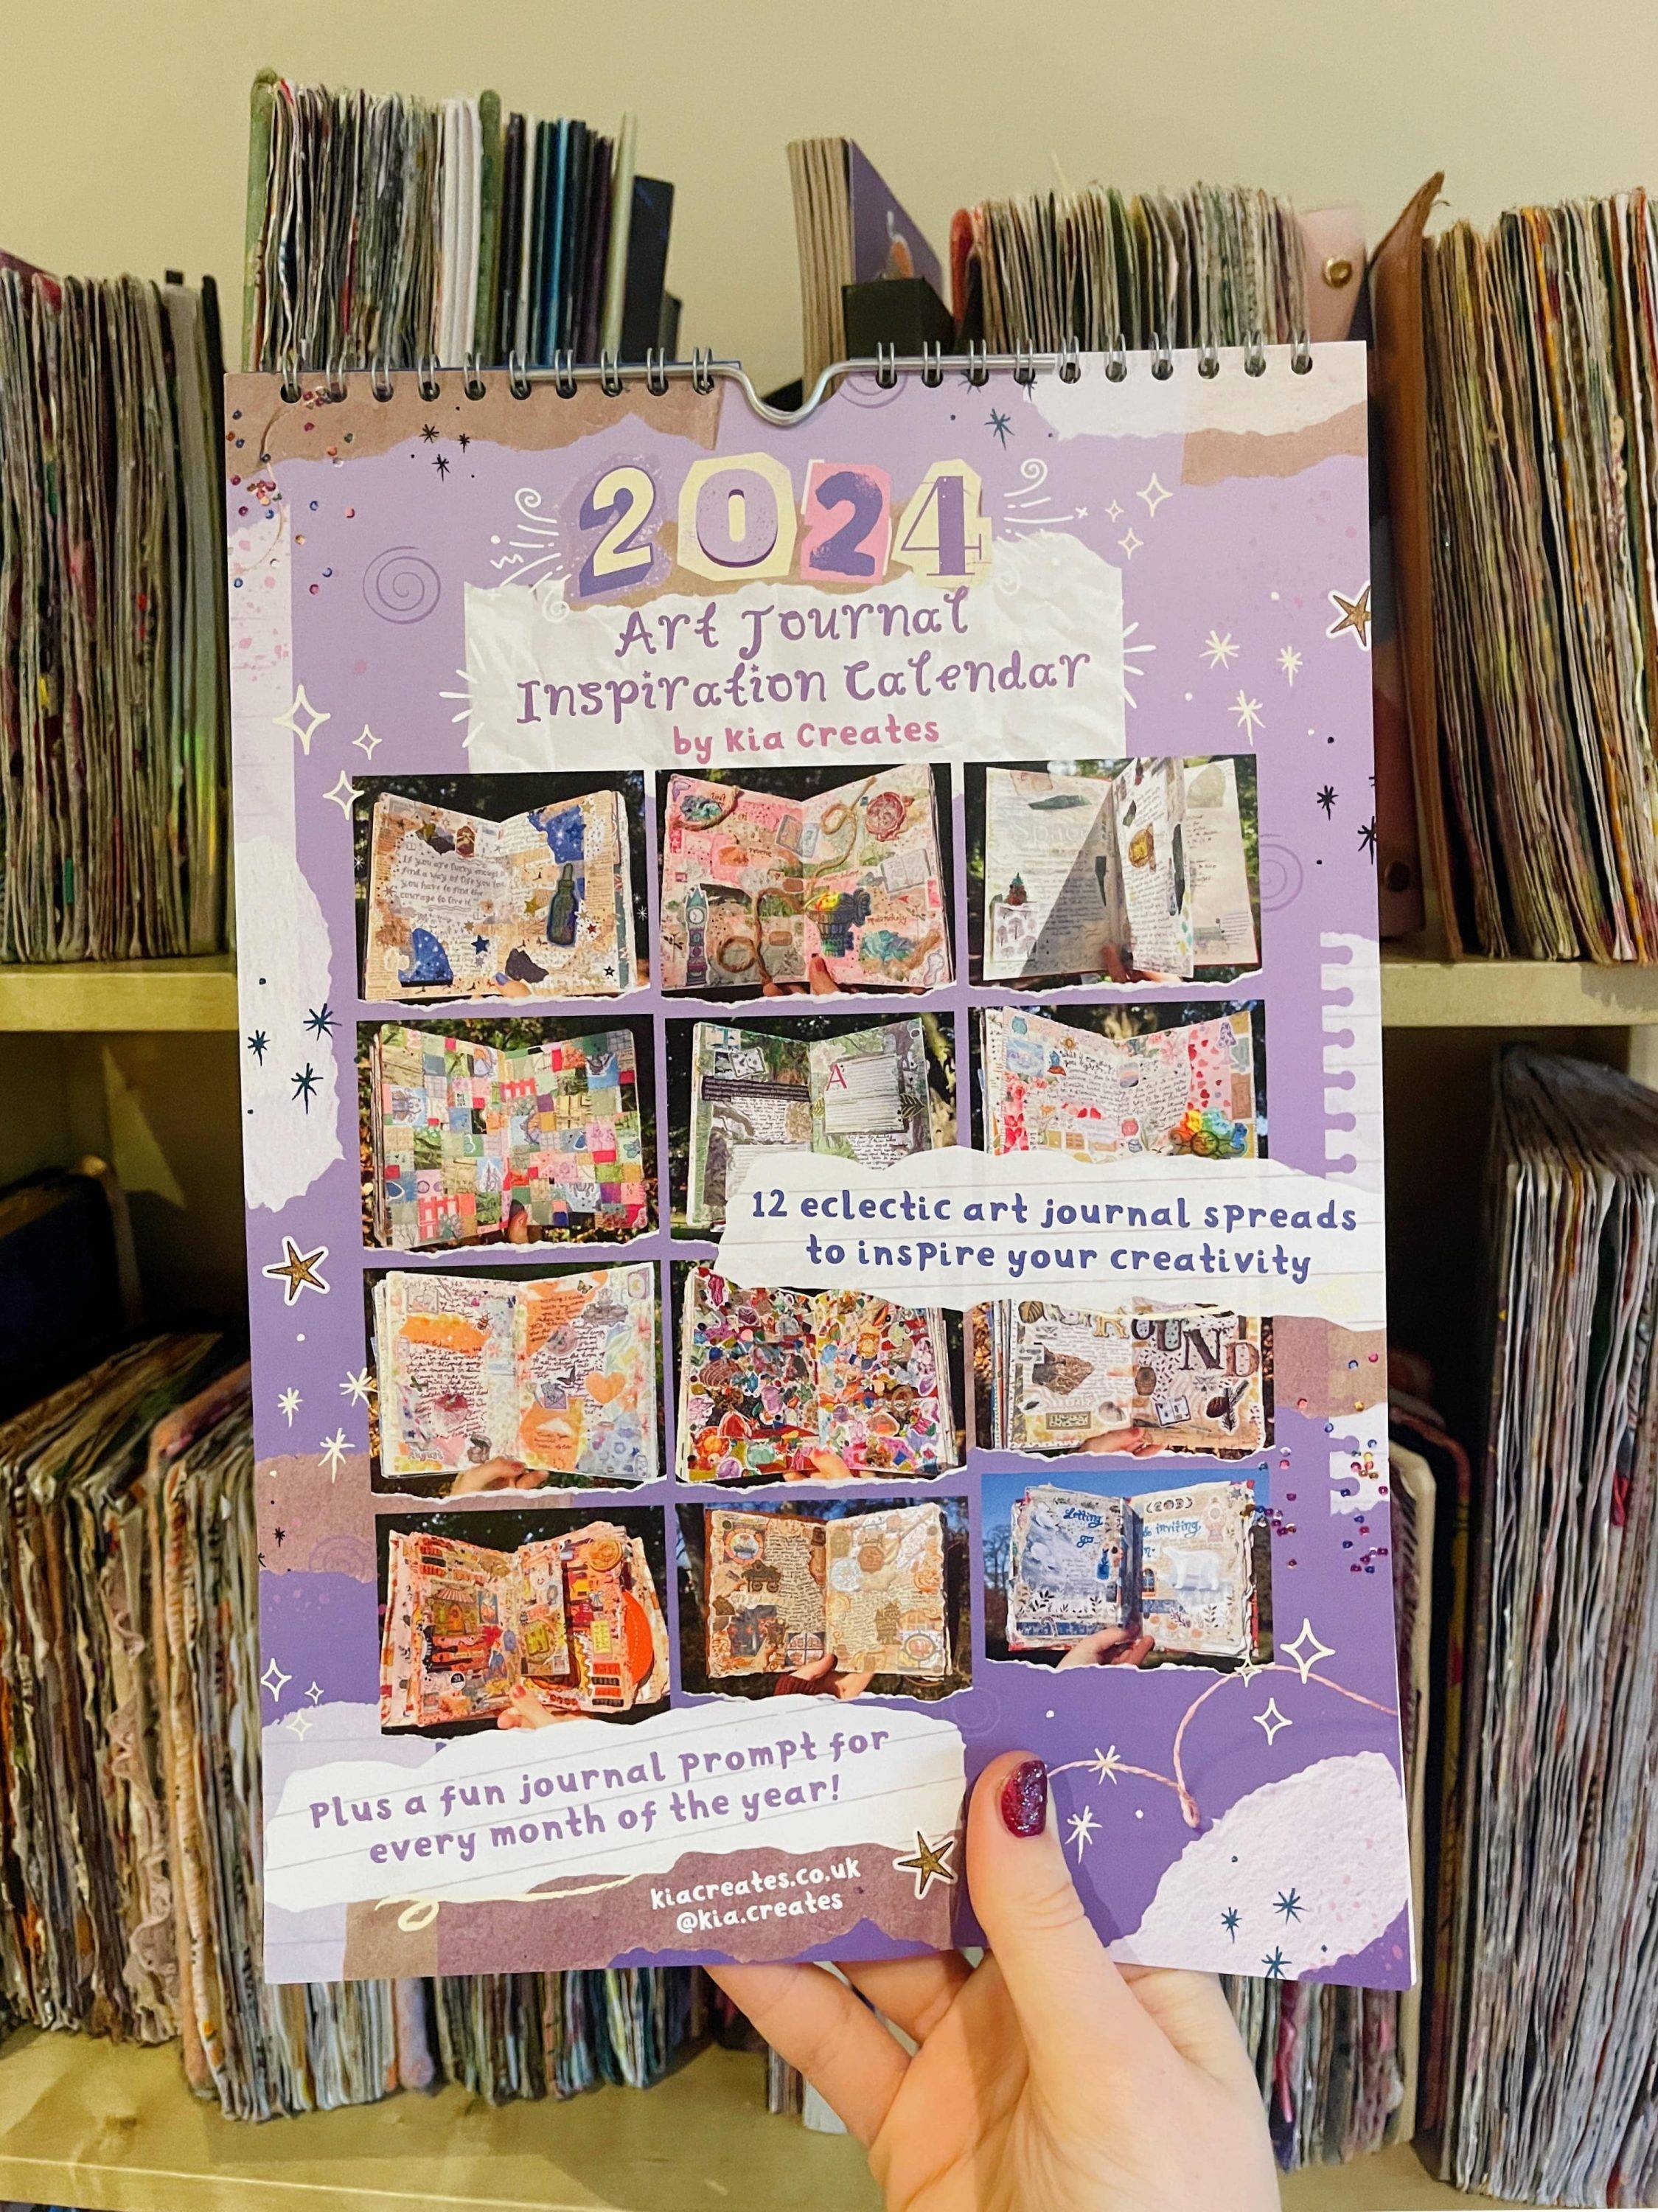 2024 art journal calendar – art journal ideas inspiration and prompts for the yeat – creative journaling gift by Kia Creates – wall calendar (5)